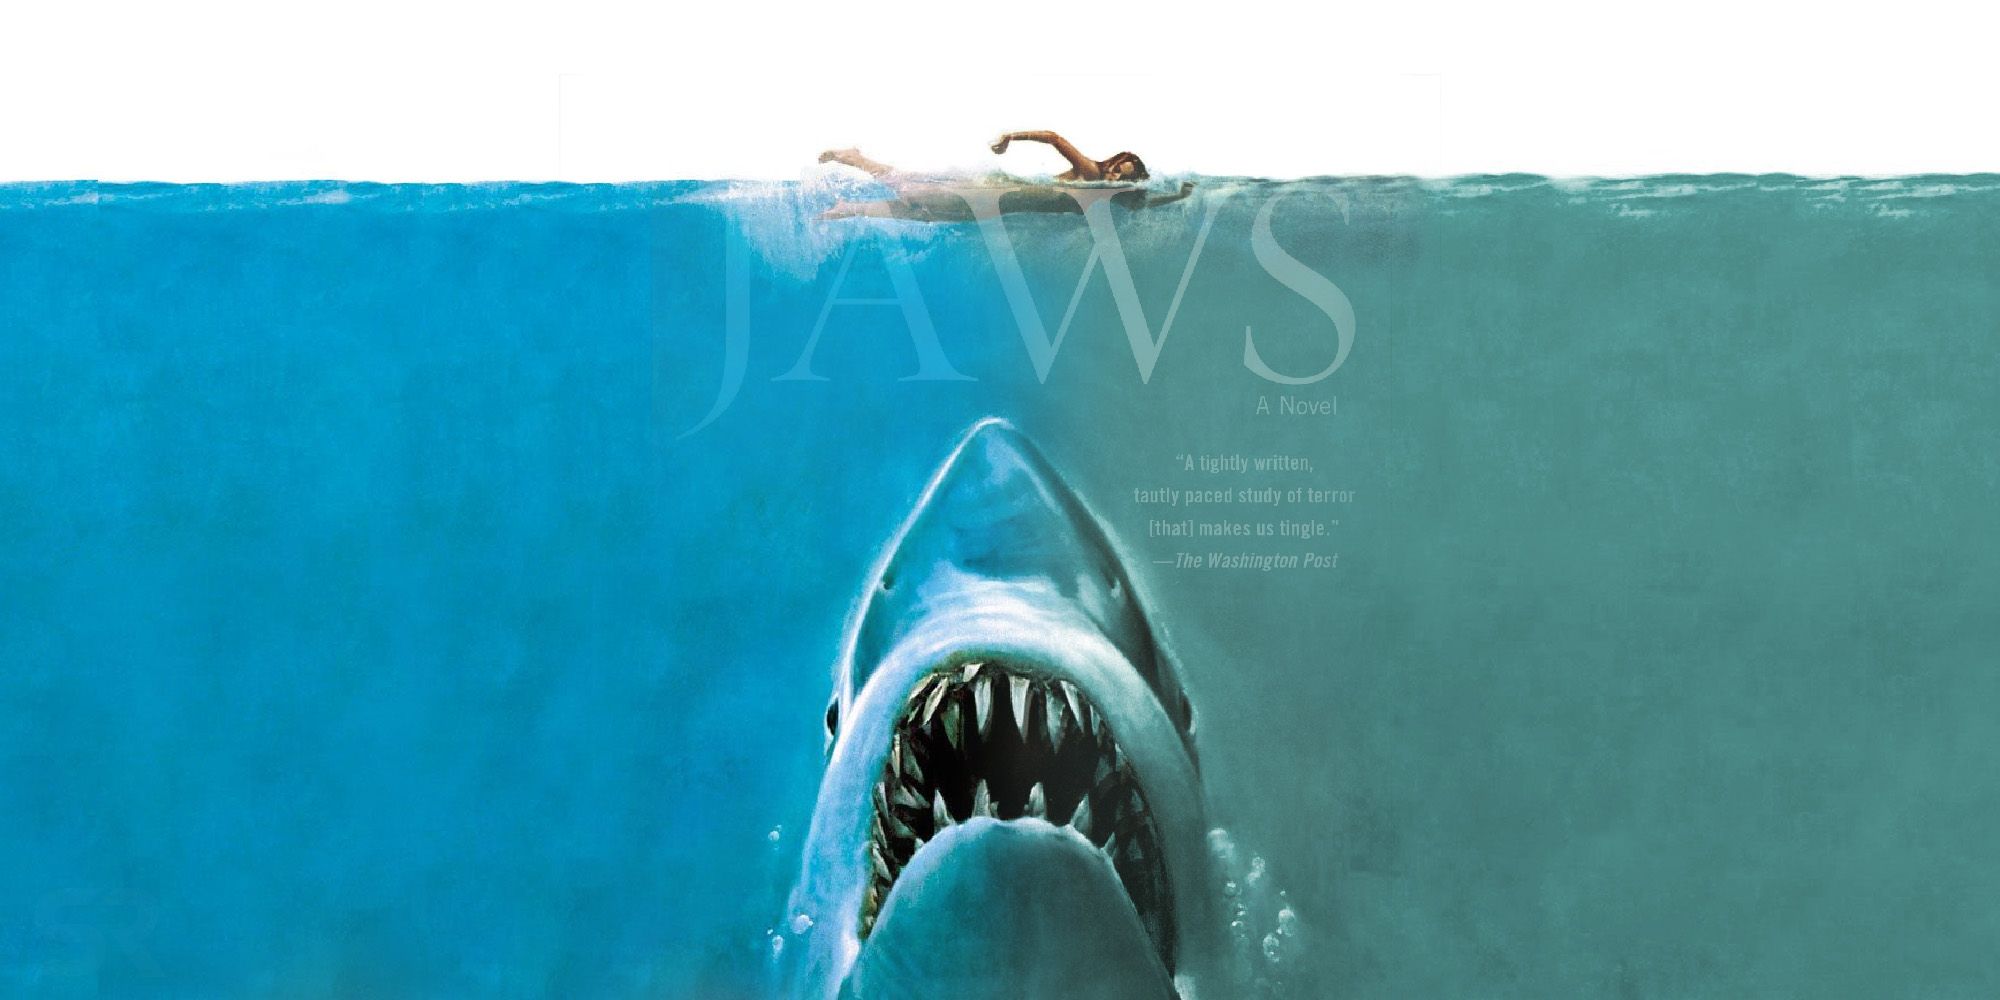 jaws book cover movie poster